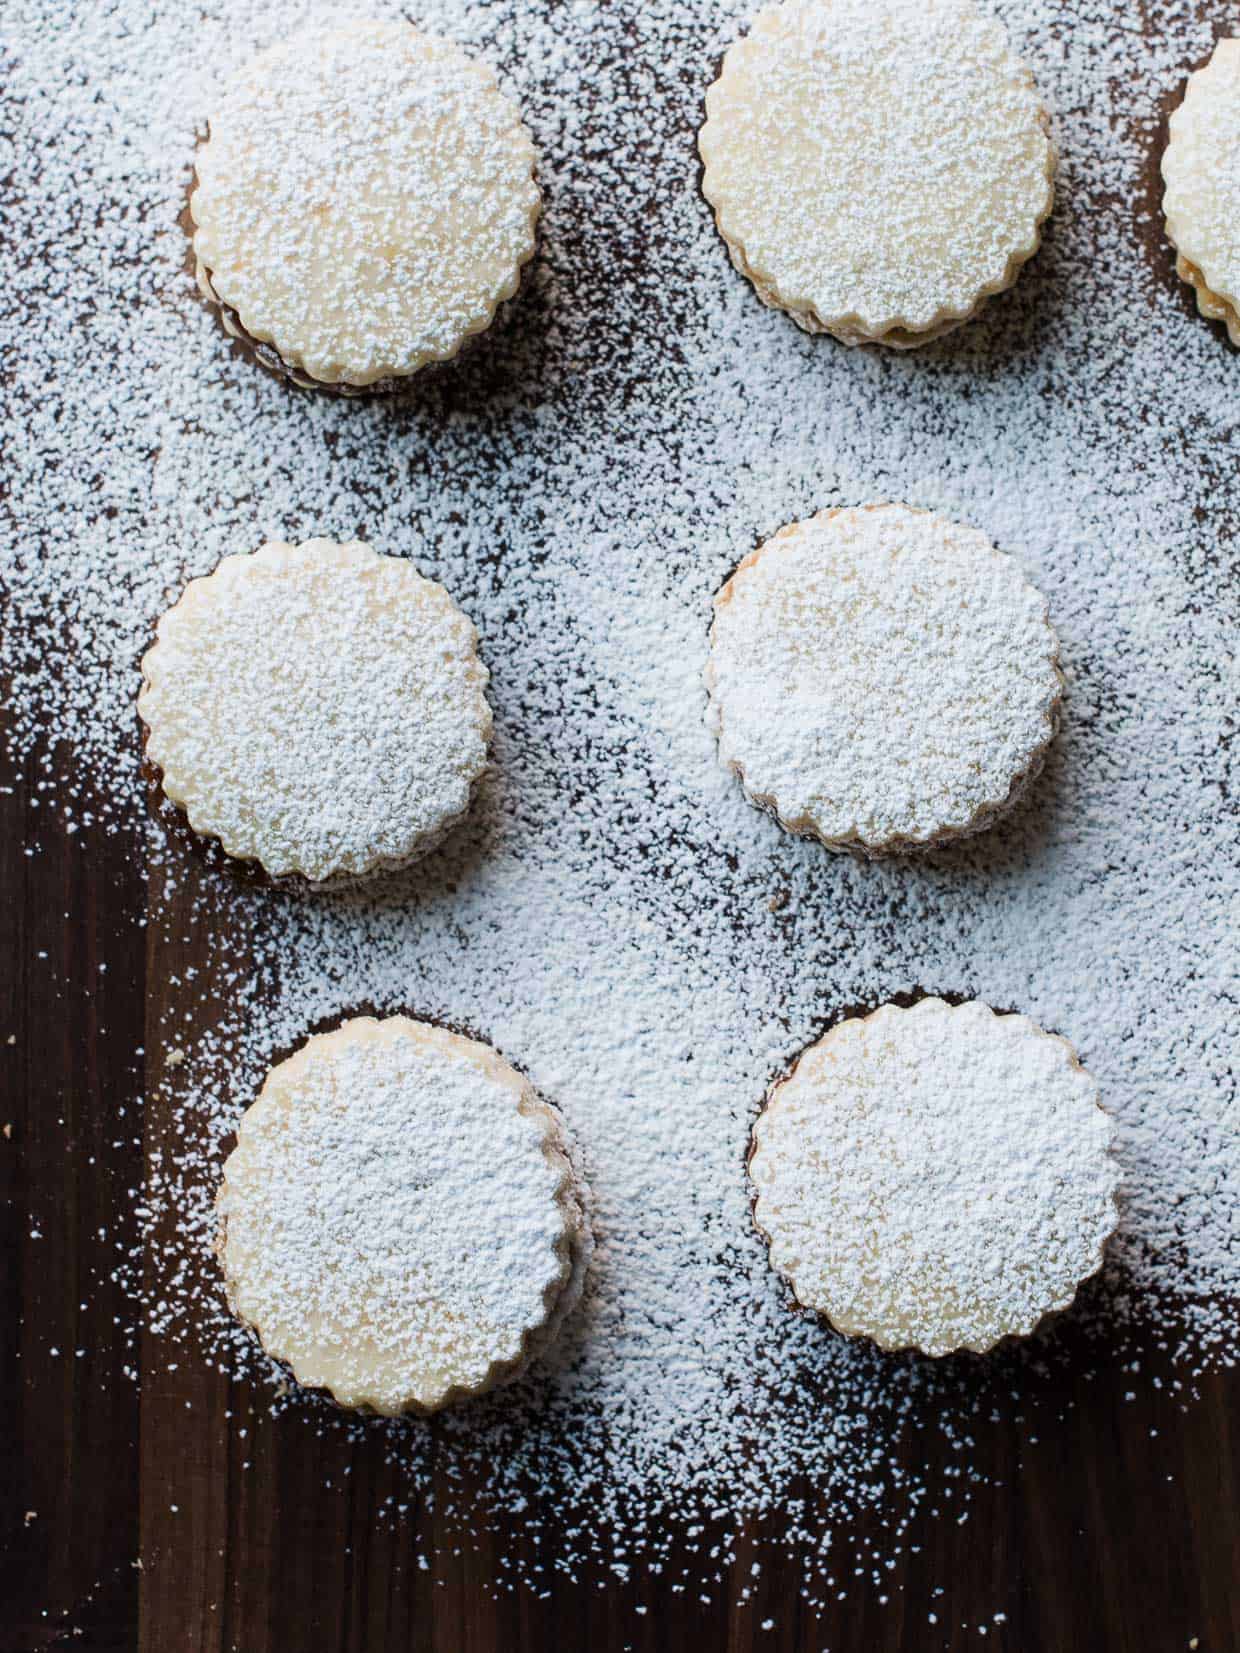 Alfajores (a sandwich cookie made with tender shortbread) sprinkled with powdered sugar.